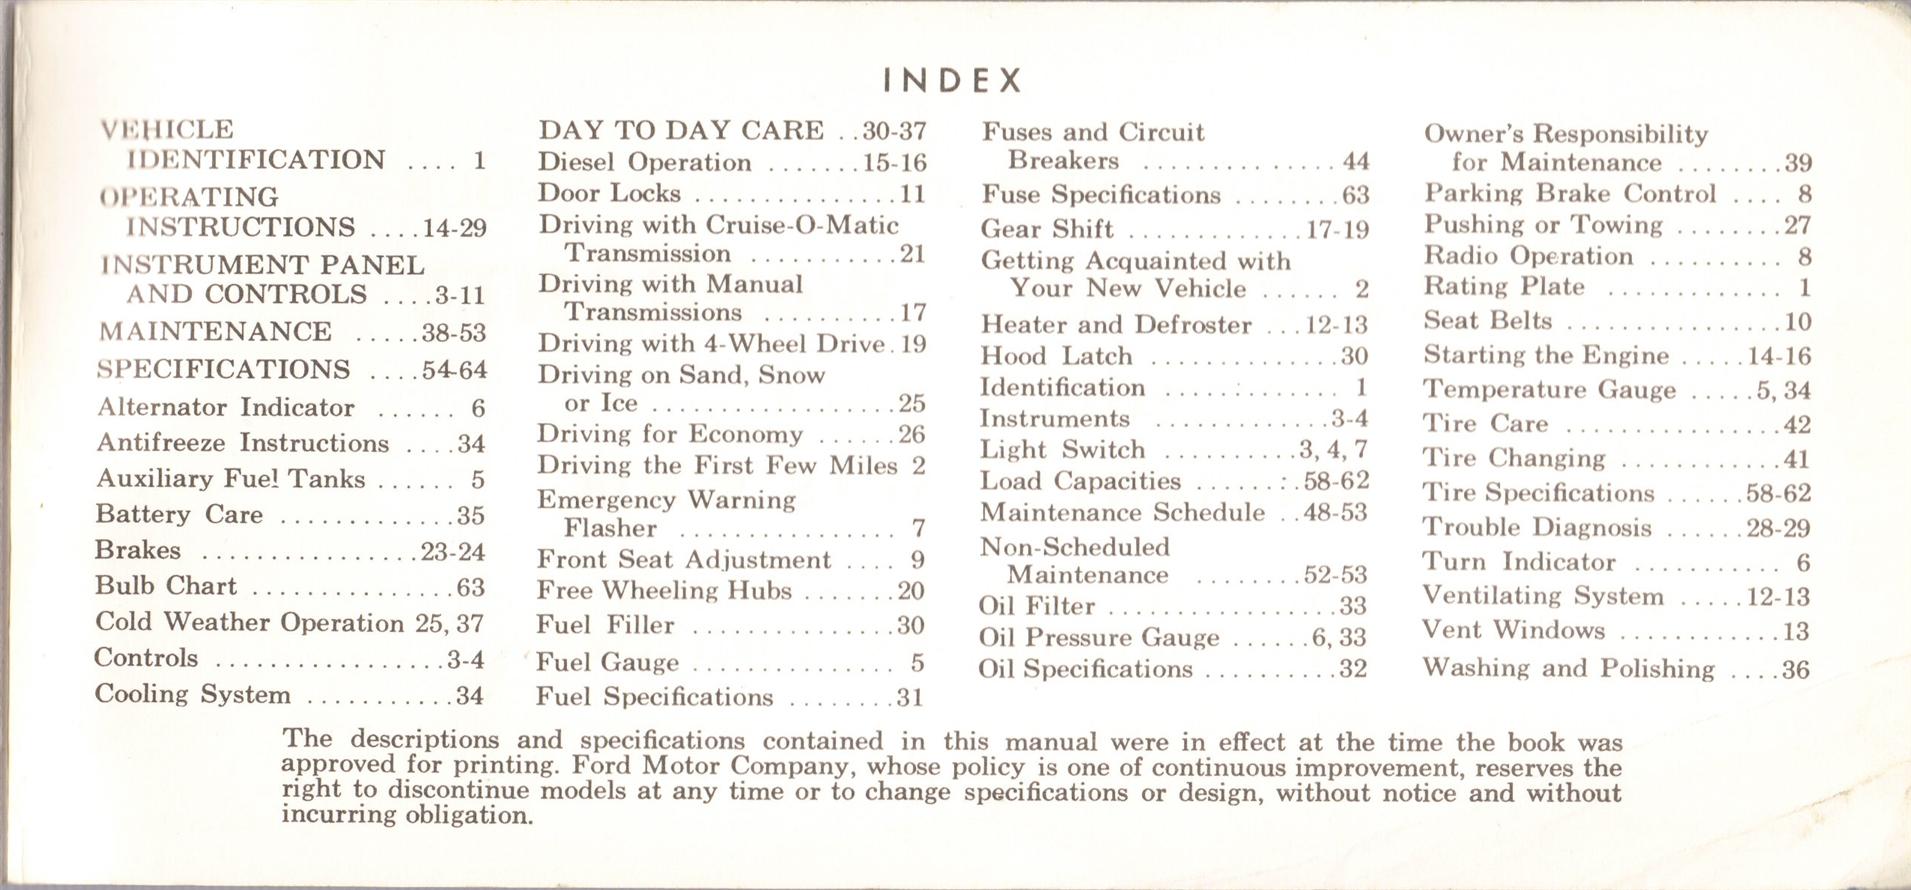 1969_Ford_Truck_Owners_Manual_Pg69